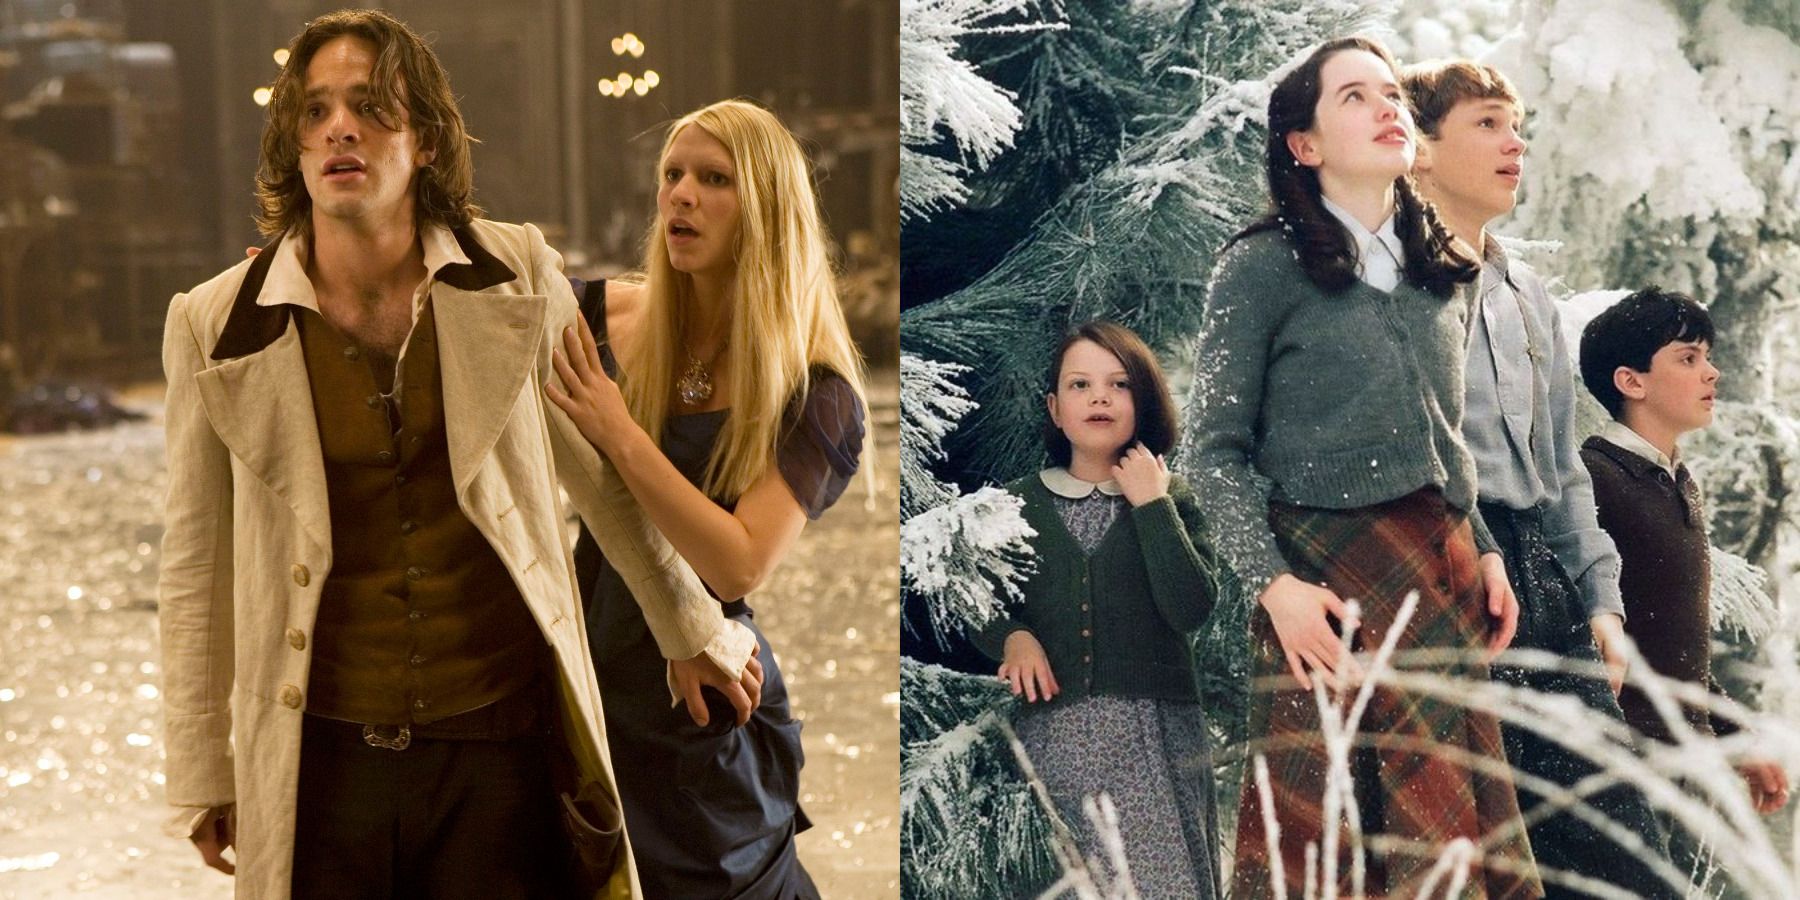 Magical movies feature split image Stardust and The Chronicles of Narnia: The Lion, the Witch and the Wardrobe